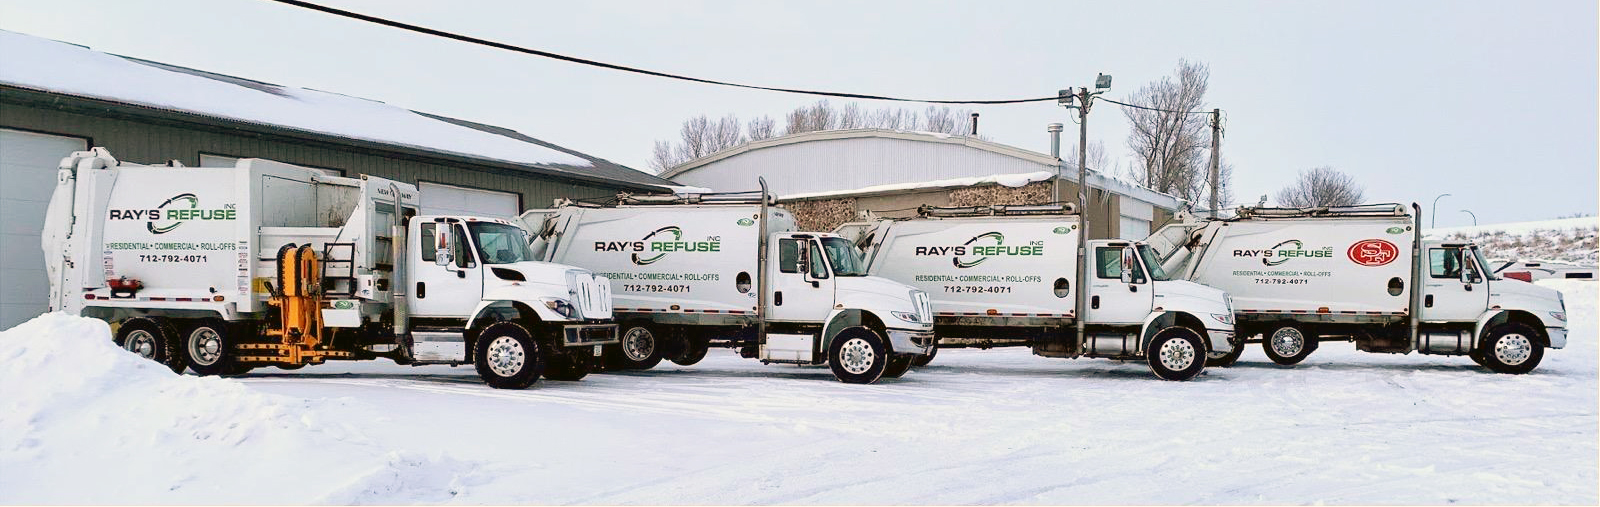 Ray's Refuse Truck Lineup